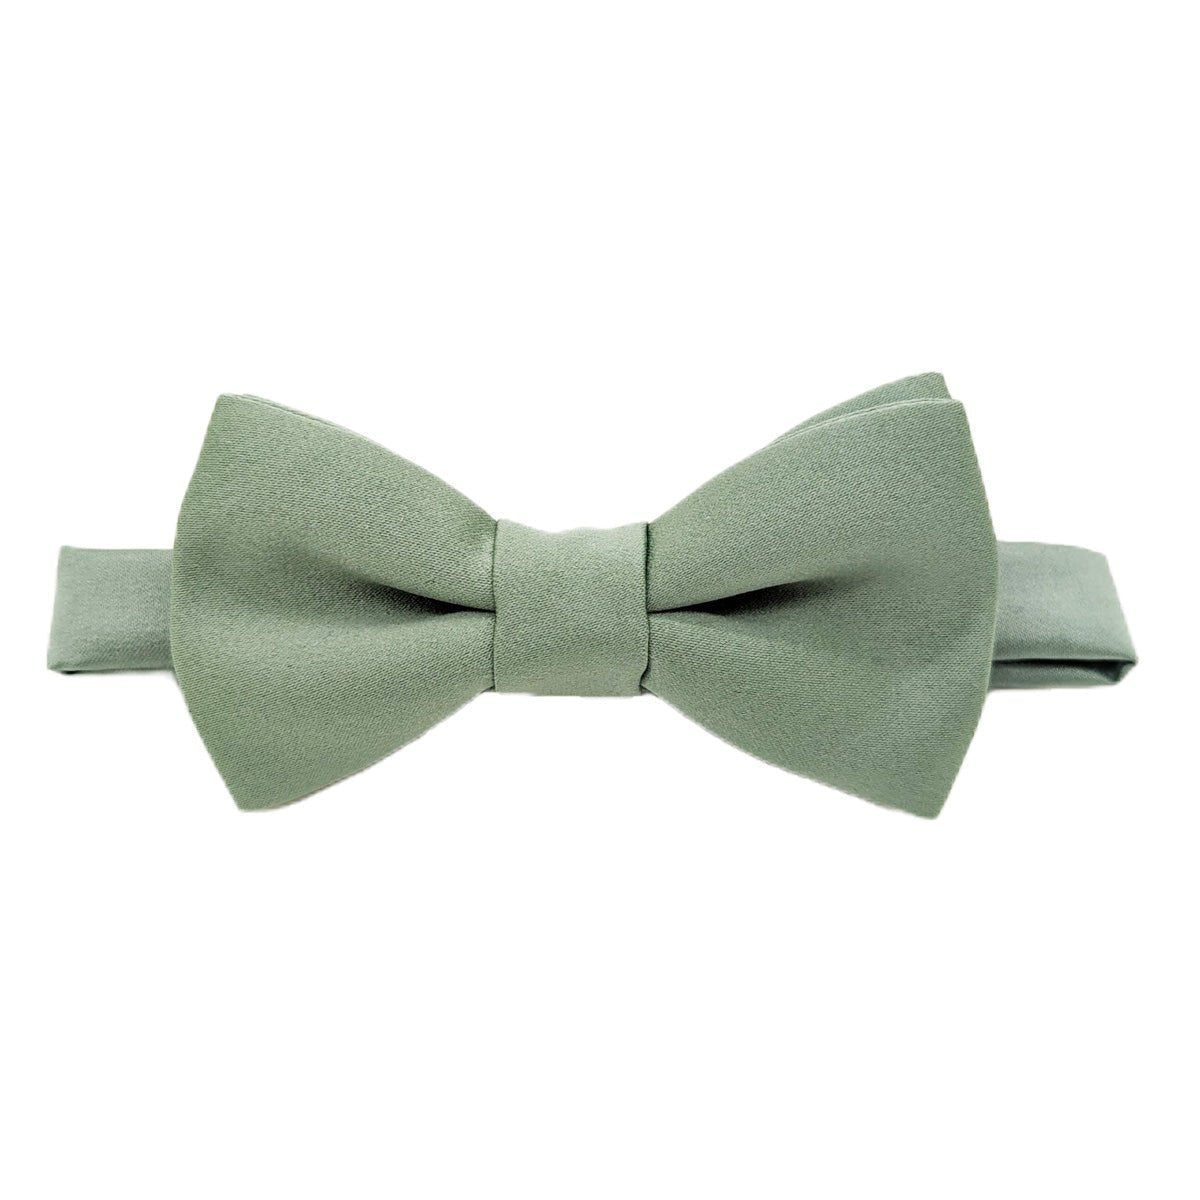 Sage Boys Bow Ties - Childrenswear - Neckstrap - Swagger & Swoon